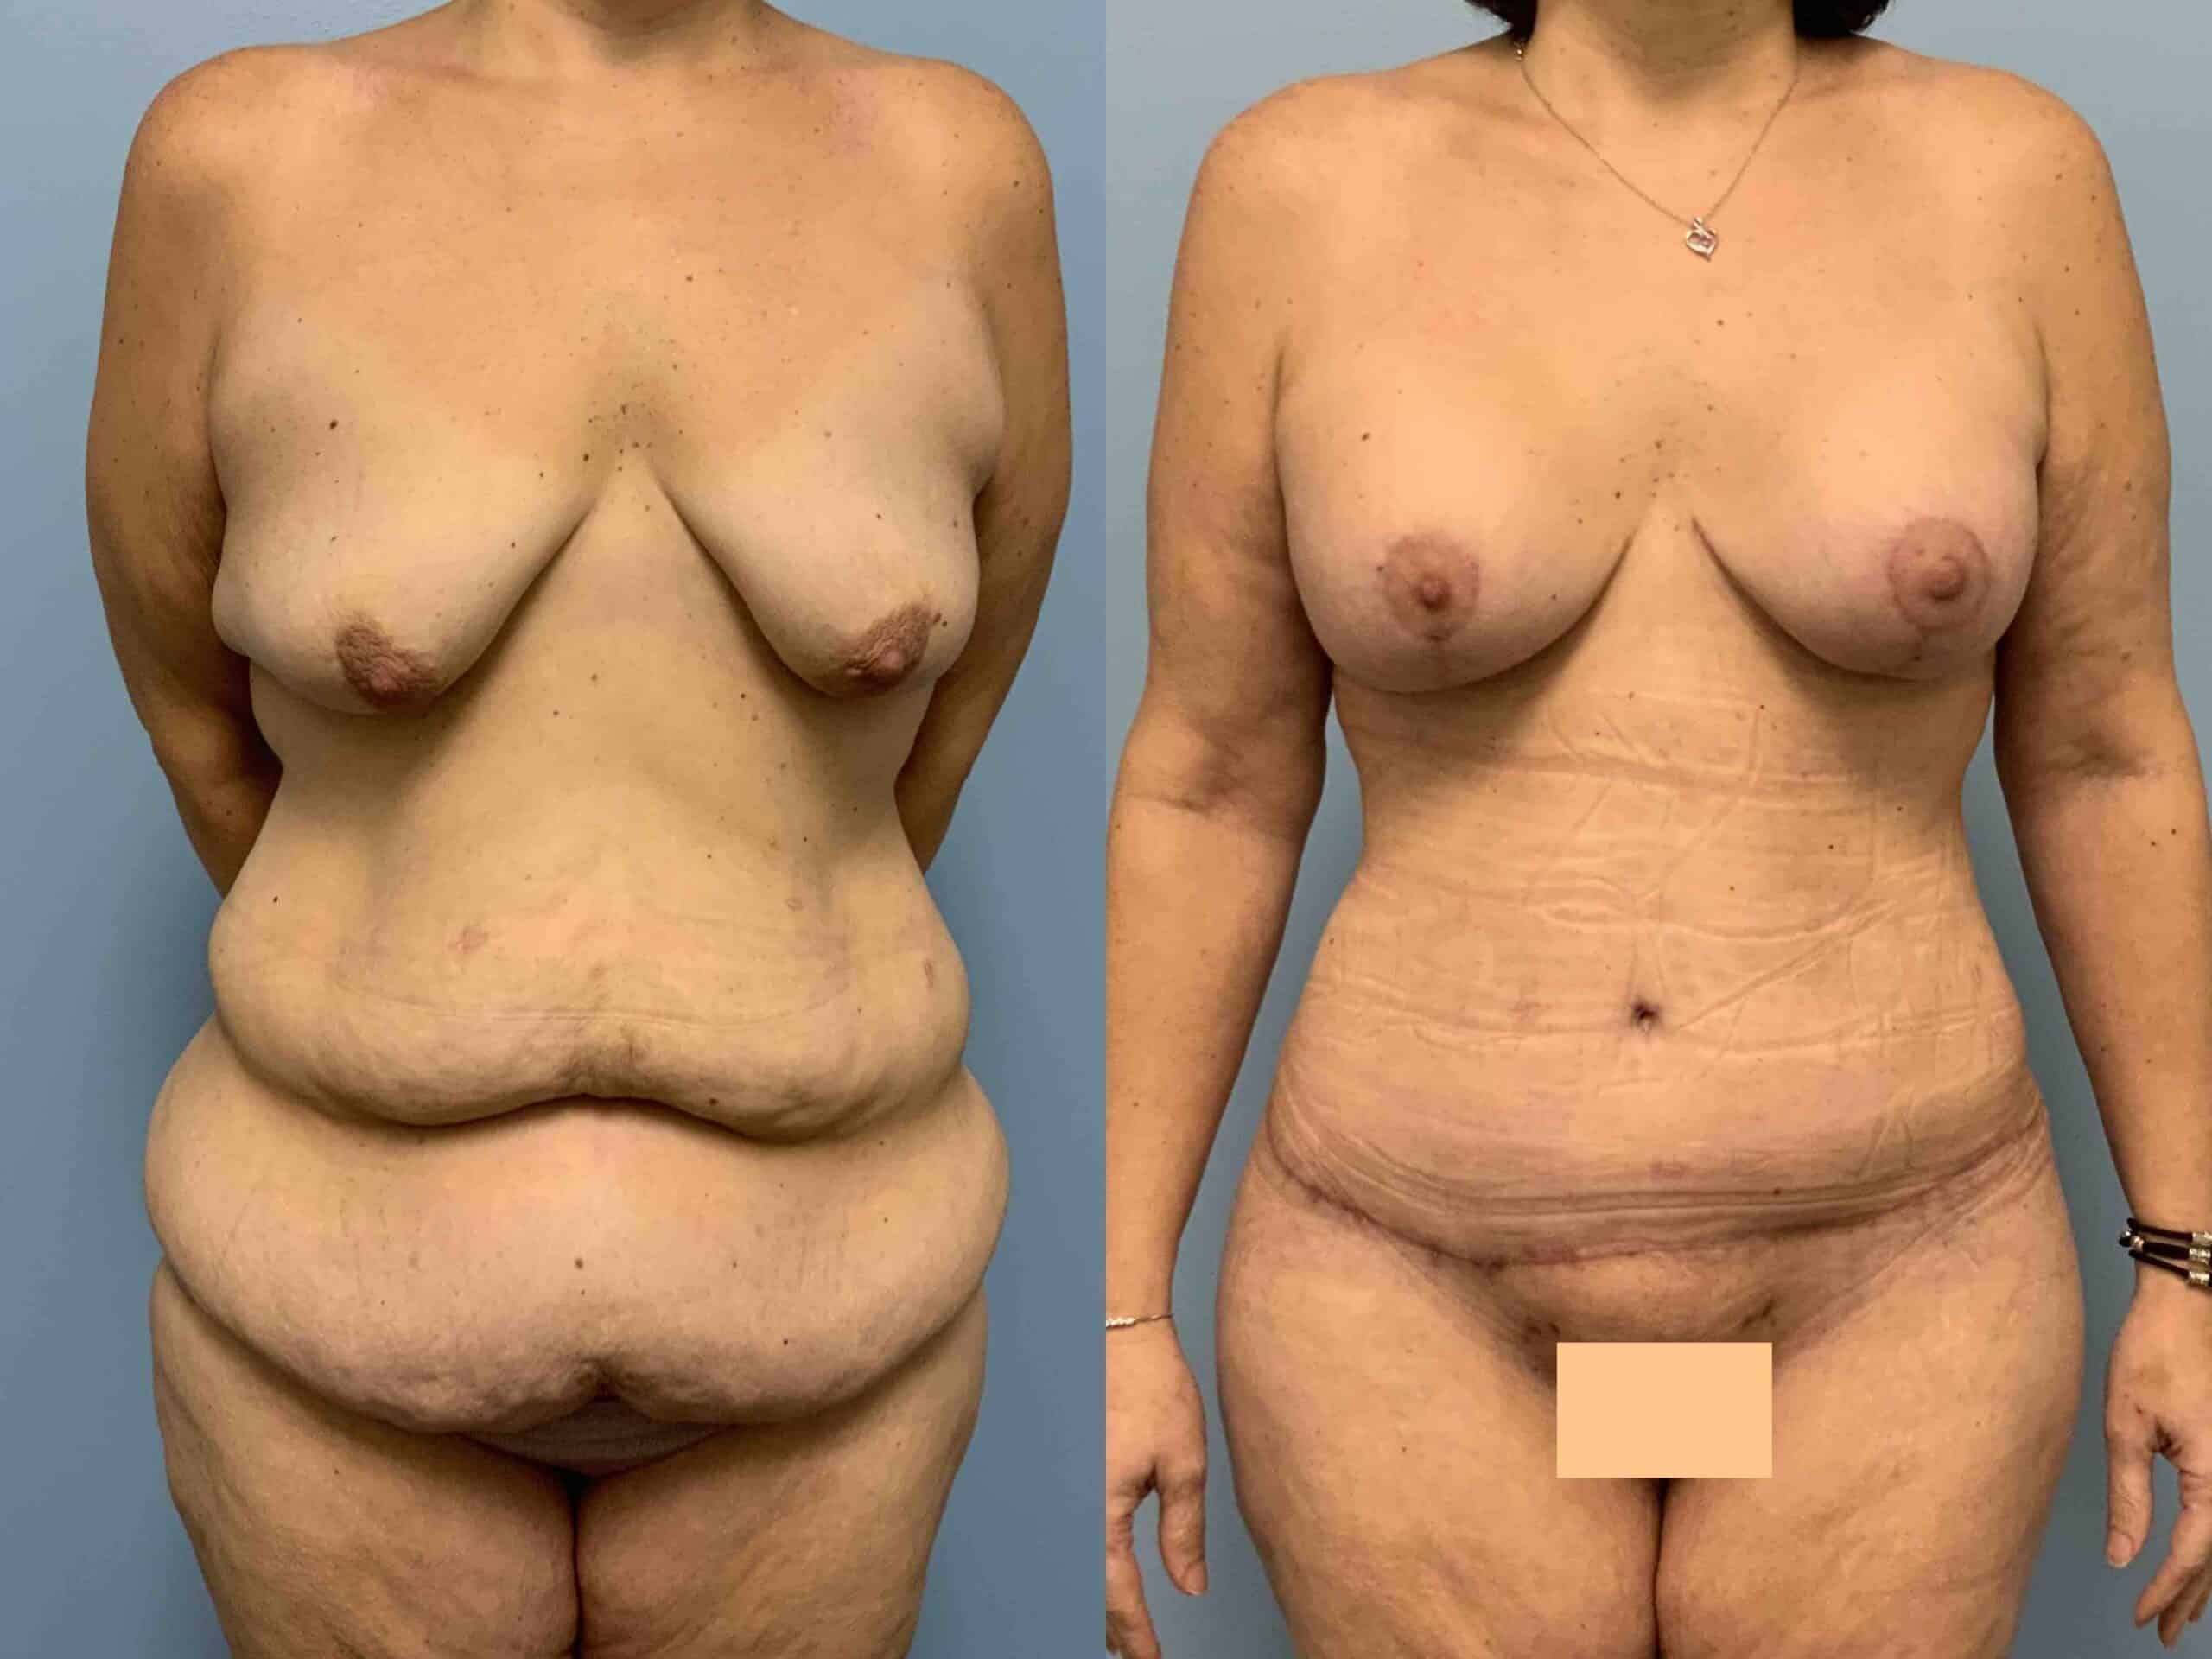 Before and after, 2 mo post op from Tummy Tuck, Belt Lipectomy, VASER Abdomen, Mons, Flanks Axilla, Axillary Roll Resection Breast Lift/Mastopexy, Breast Augmentation performed by Dr. Paul Vanek (front view)